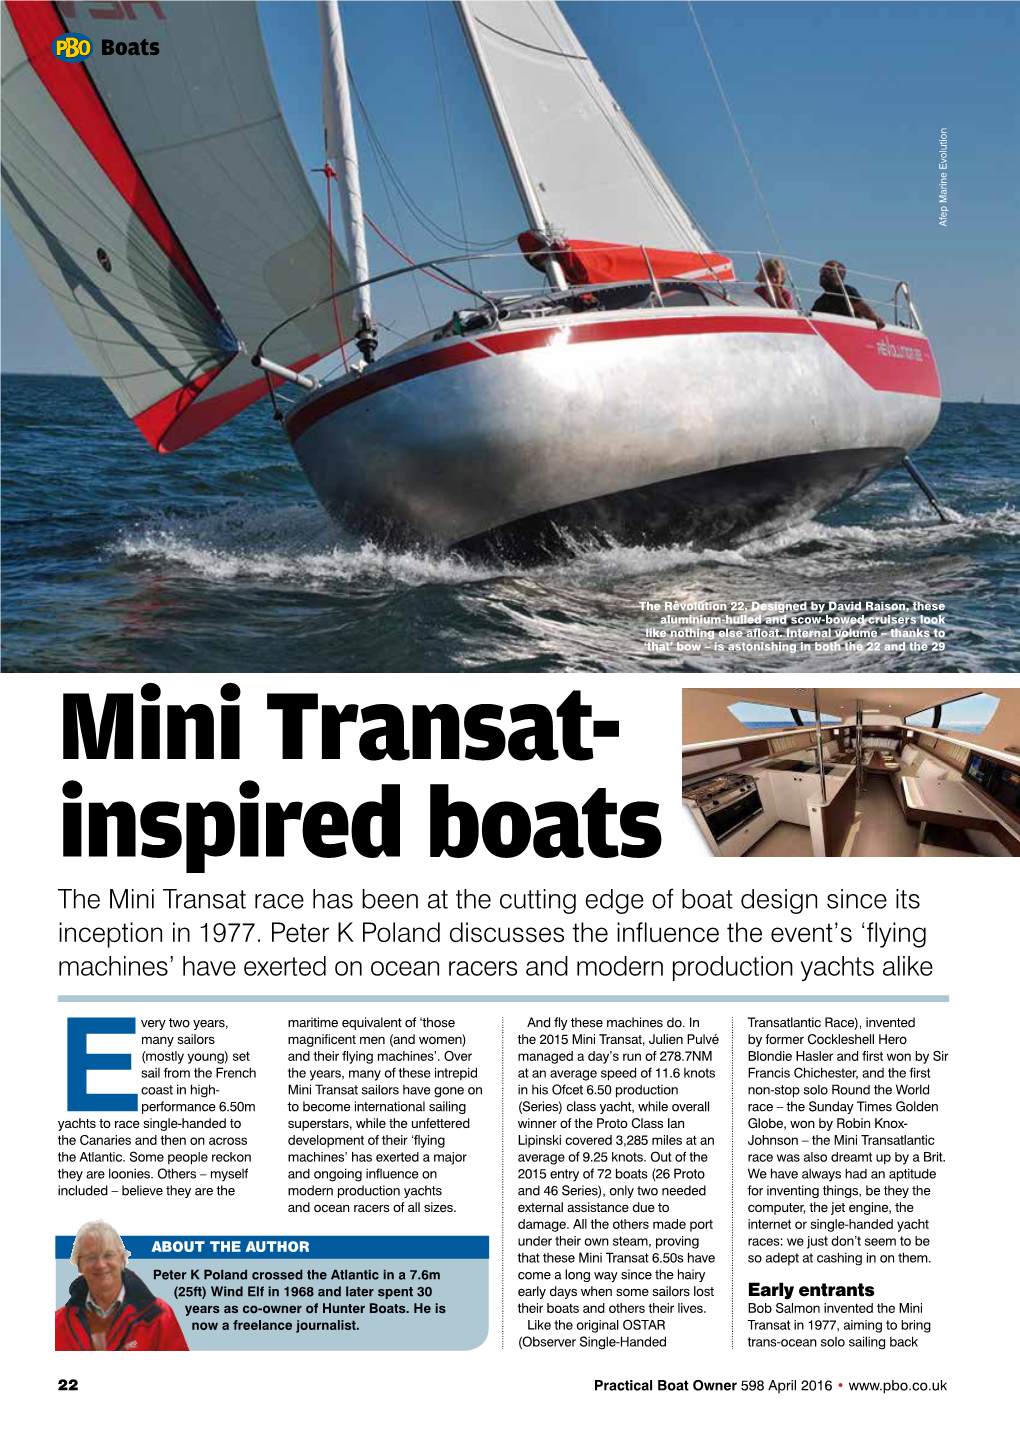 Mini Transat- Inspired Boats the Mini Transat Race Has Been at the Cutting Edge of Boat Design Since Its Inception in 1977